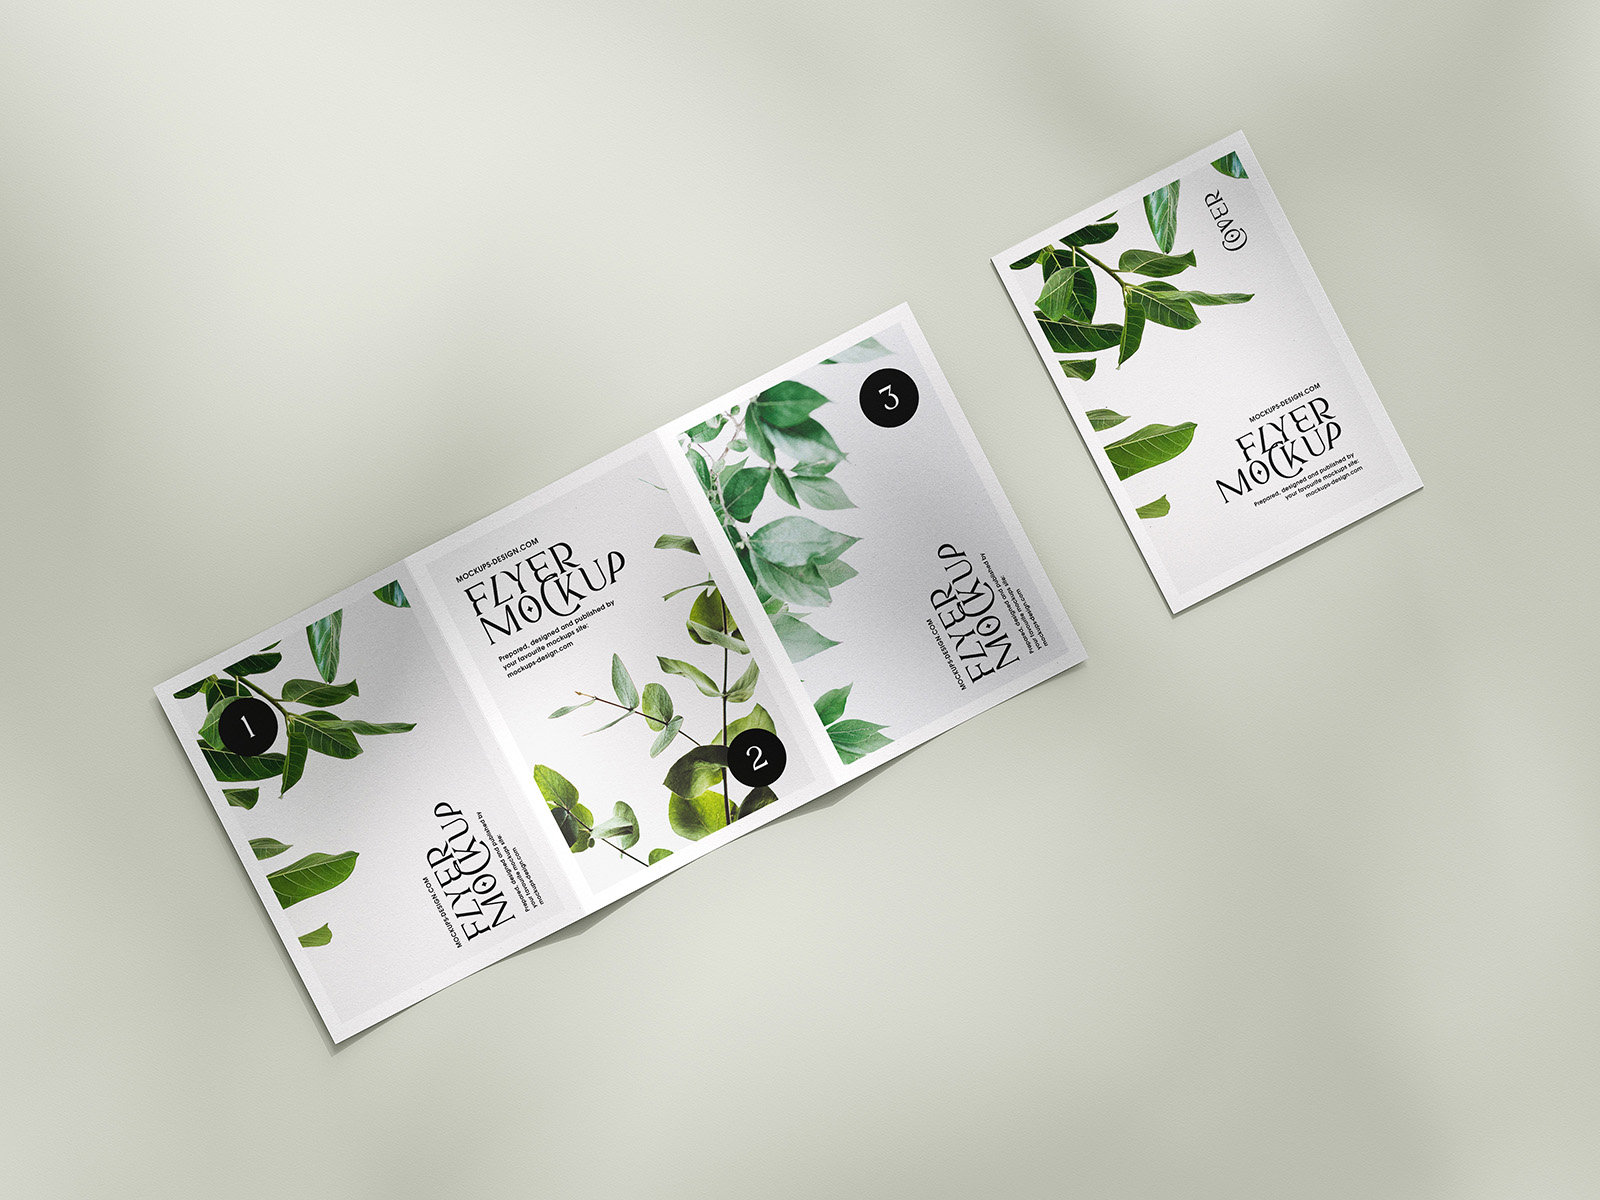 5 Mockups of A5, A6, A4 Trifold Flyers in Various Views FREE PSD